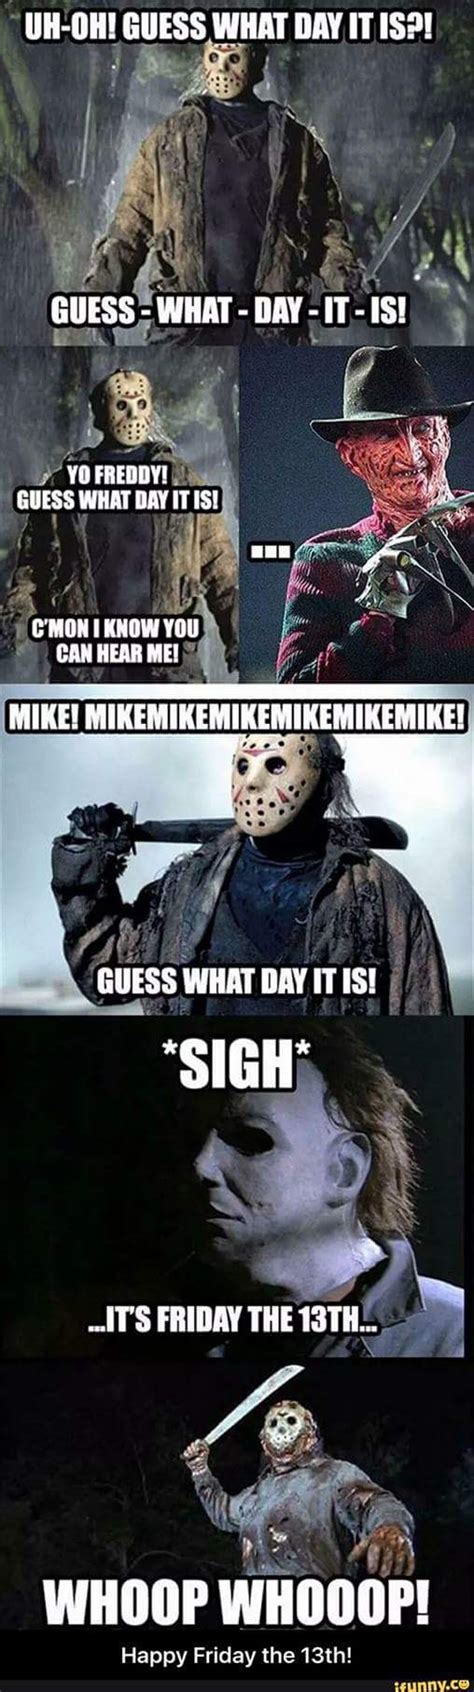 Silly Friday The 13th Meme Haha Jason Freddy And Michael Myers